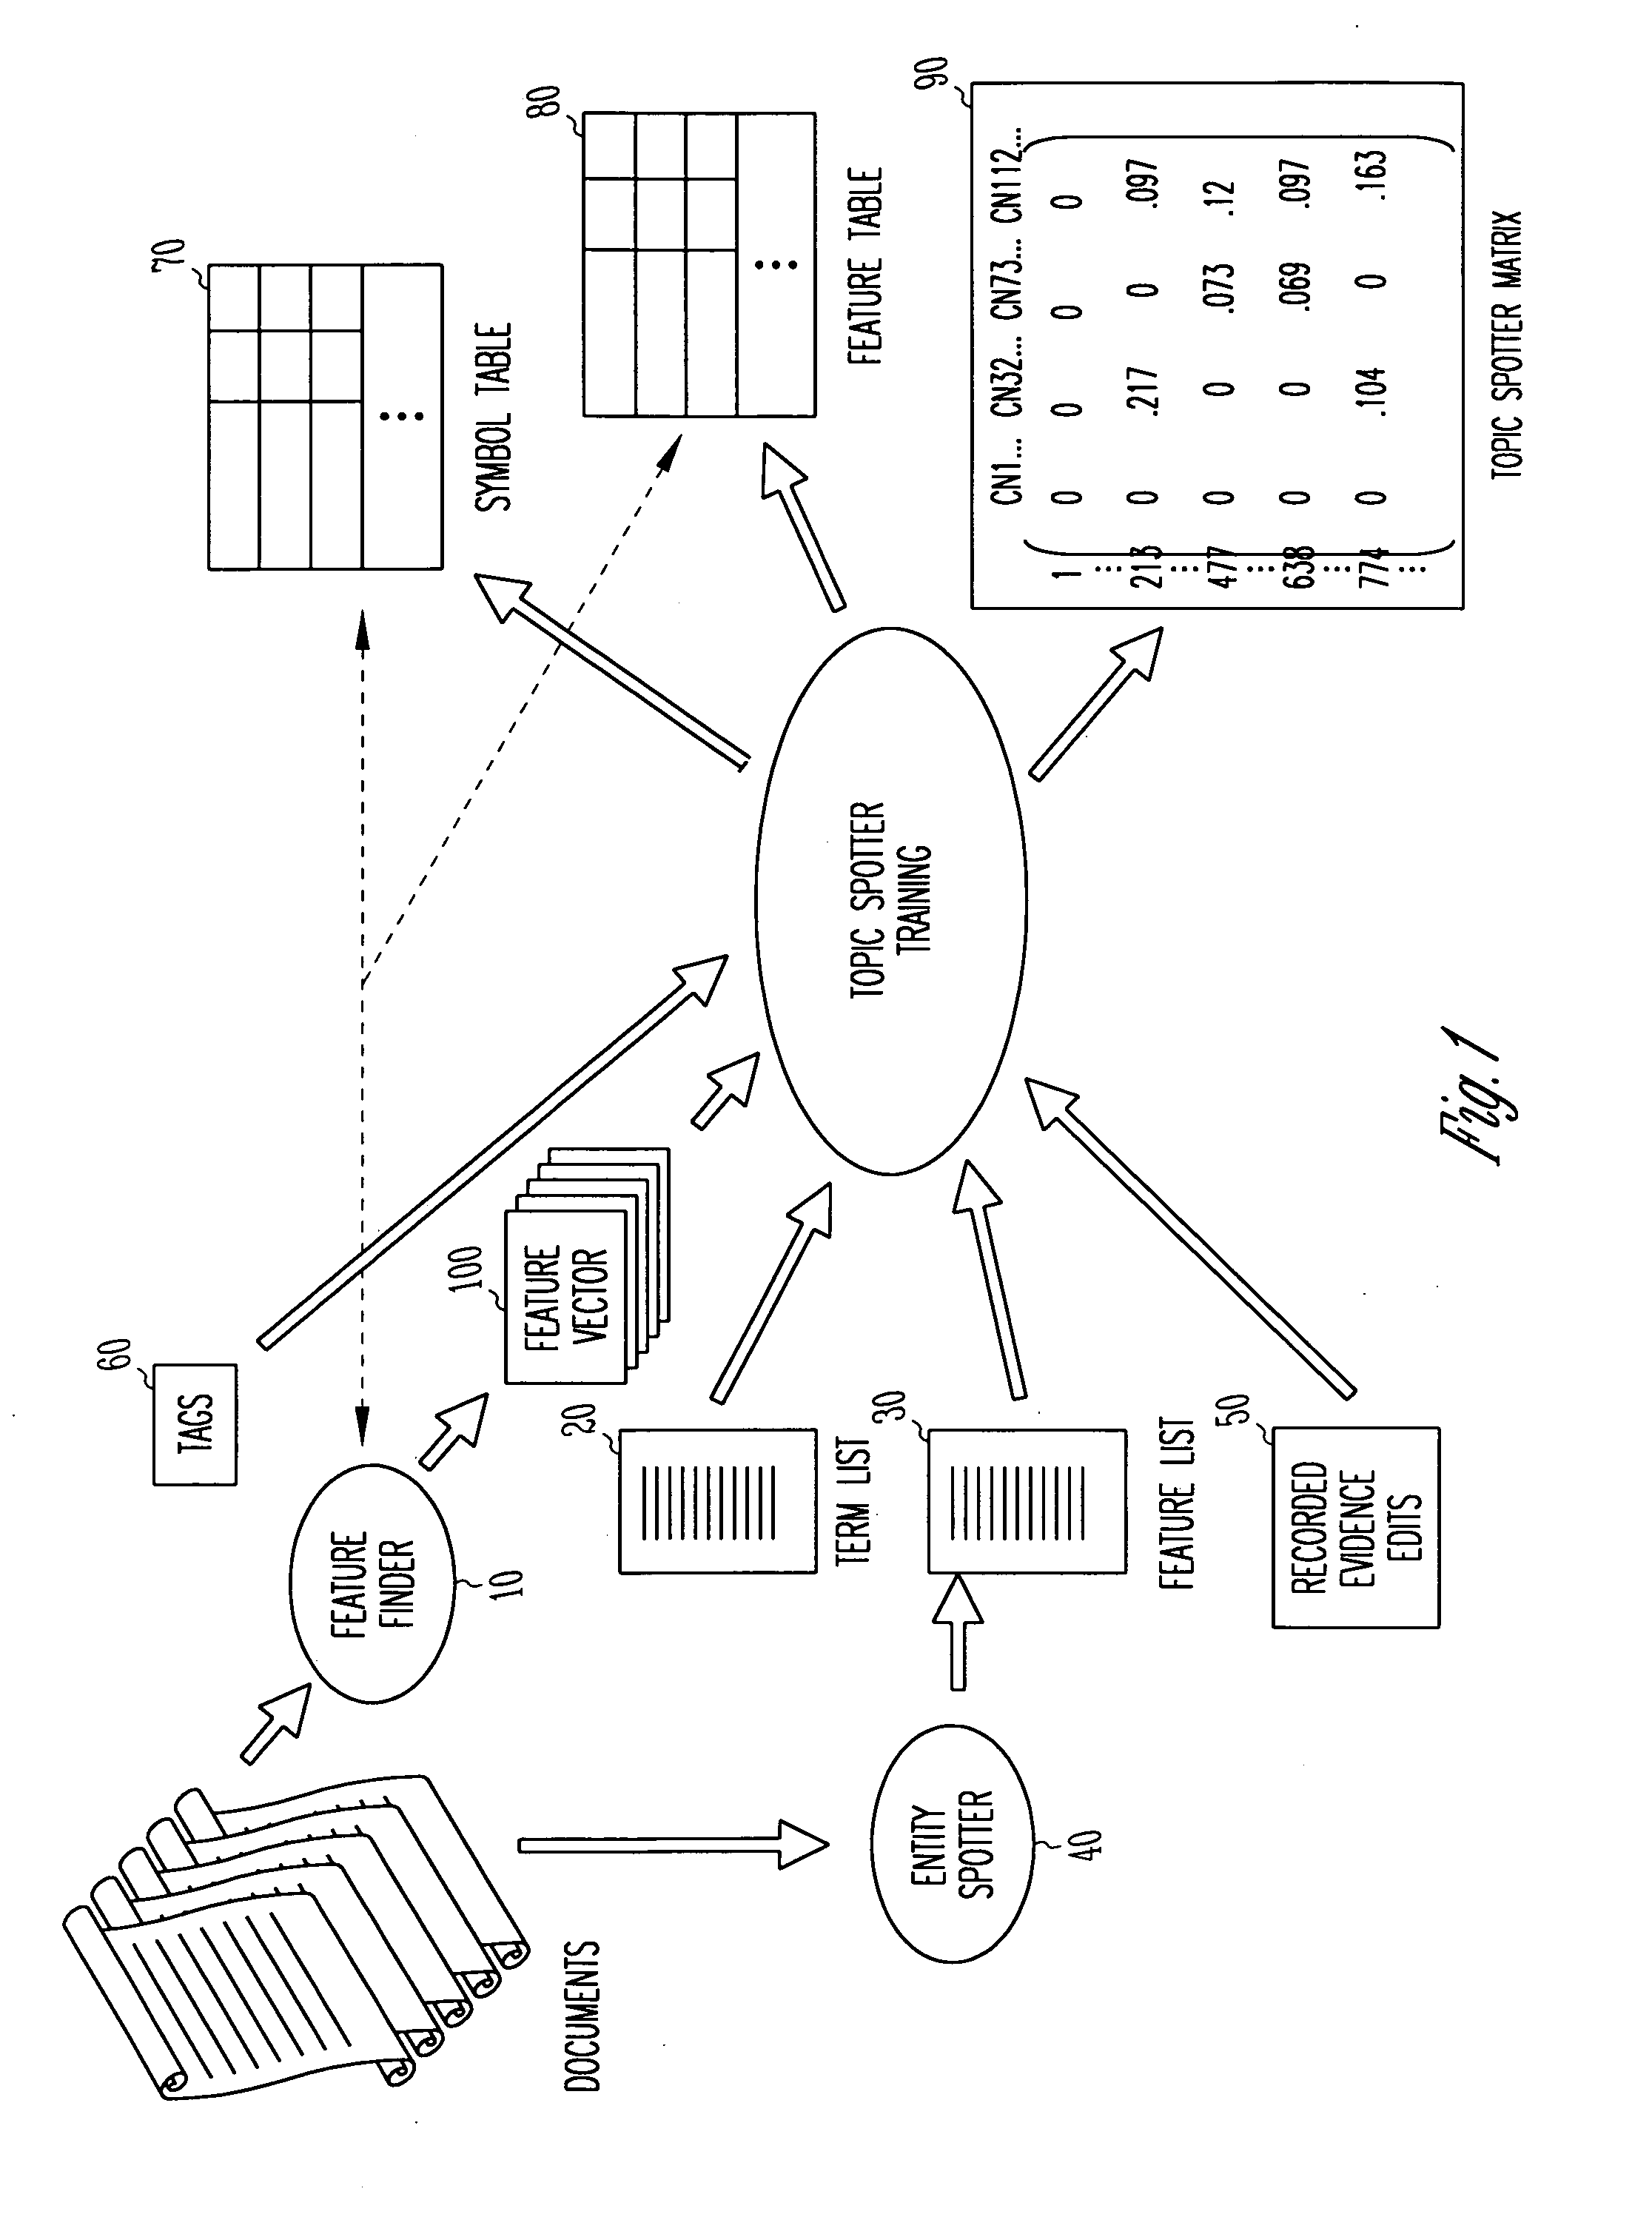 System and method for automatically classifying text